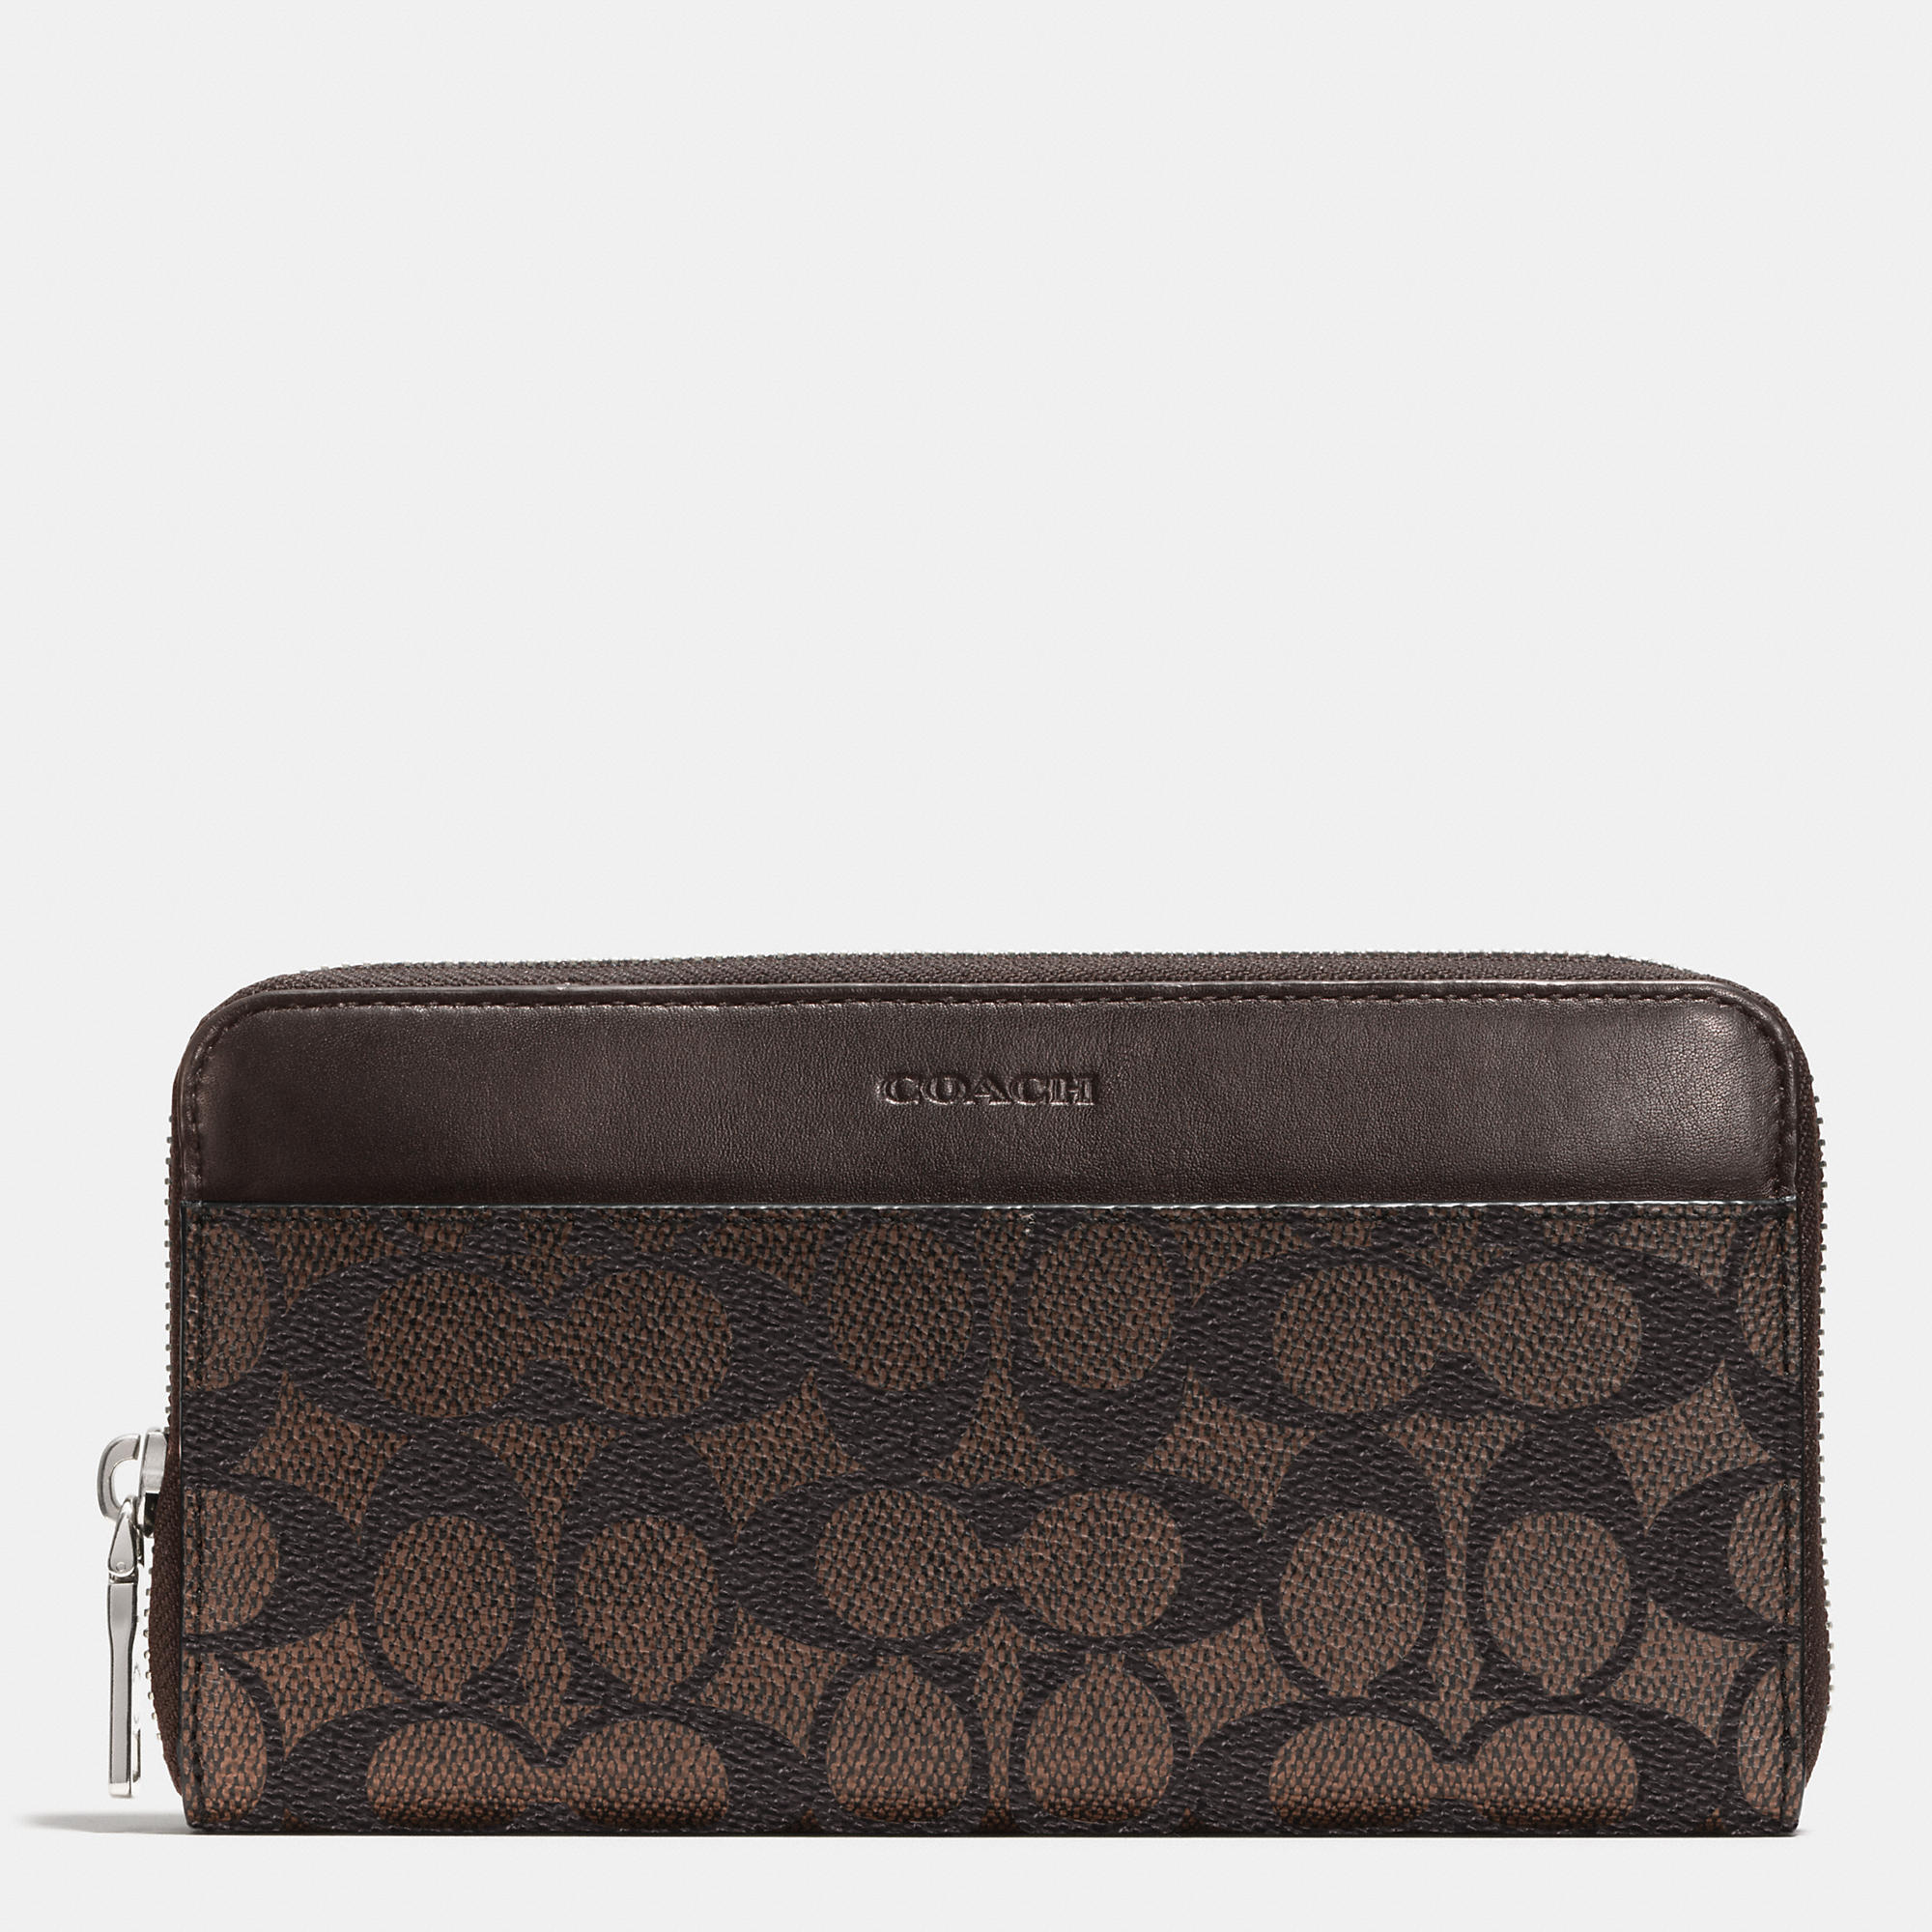 Worldwide Hot Sale Coach Accordion Wallet In Signature Canvas | Coach Outlet Canada